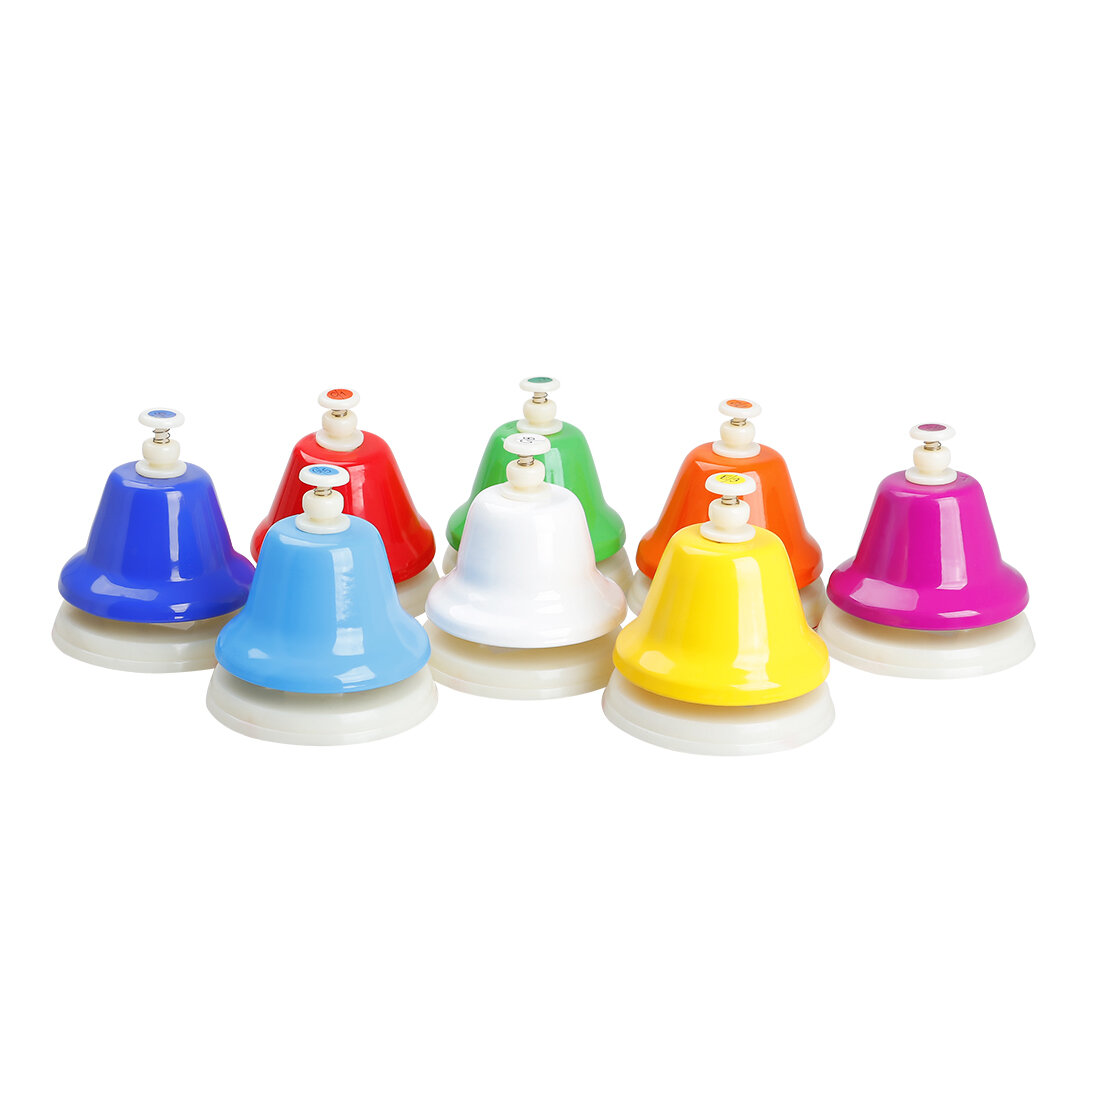 SY-67 Orff Instruments Colorful Eight Tone Bell Hand Bell Set